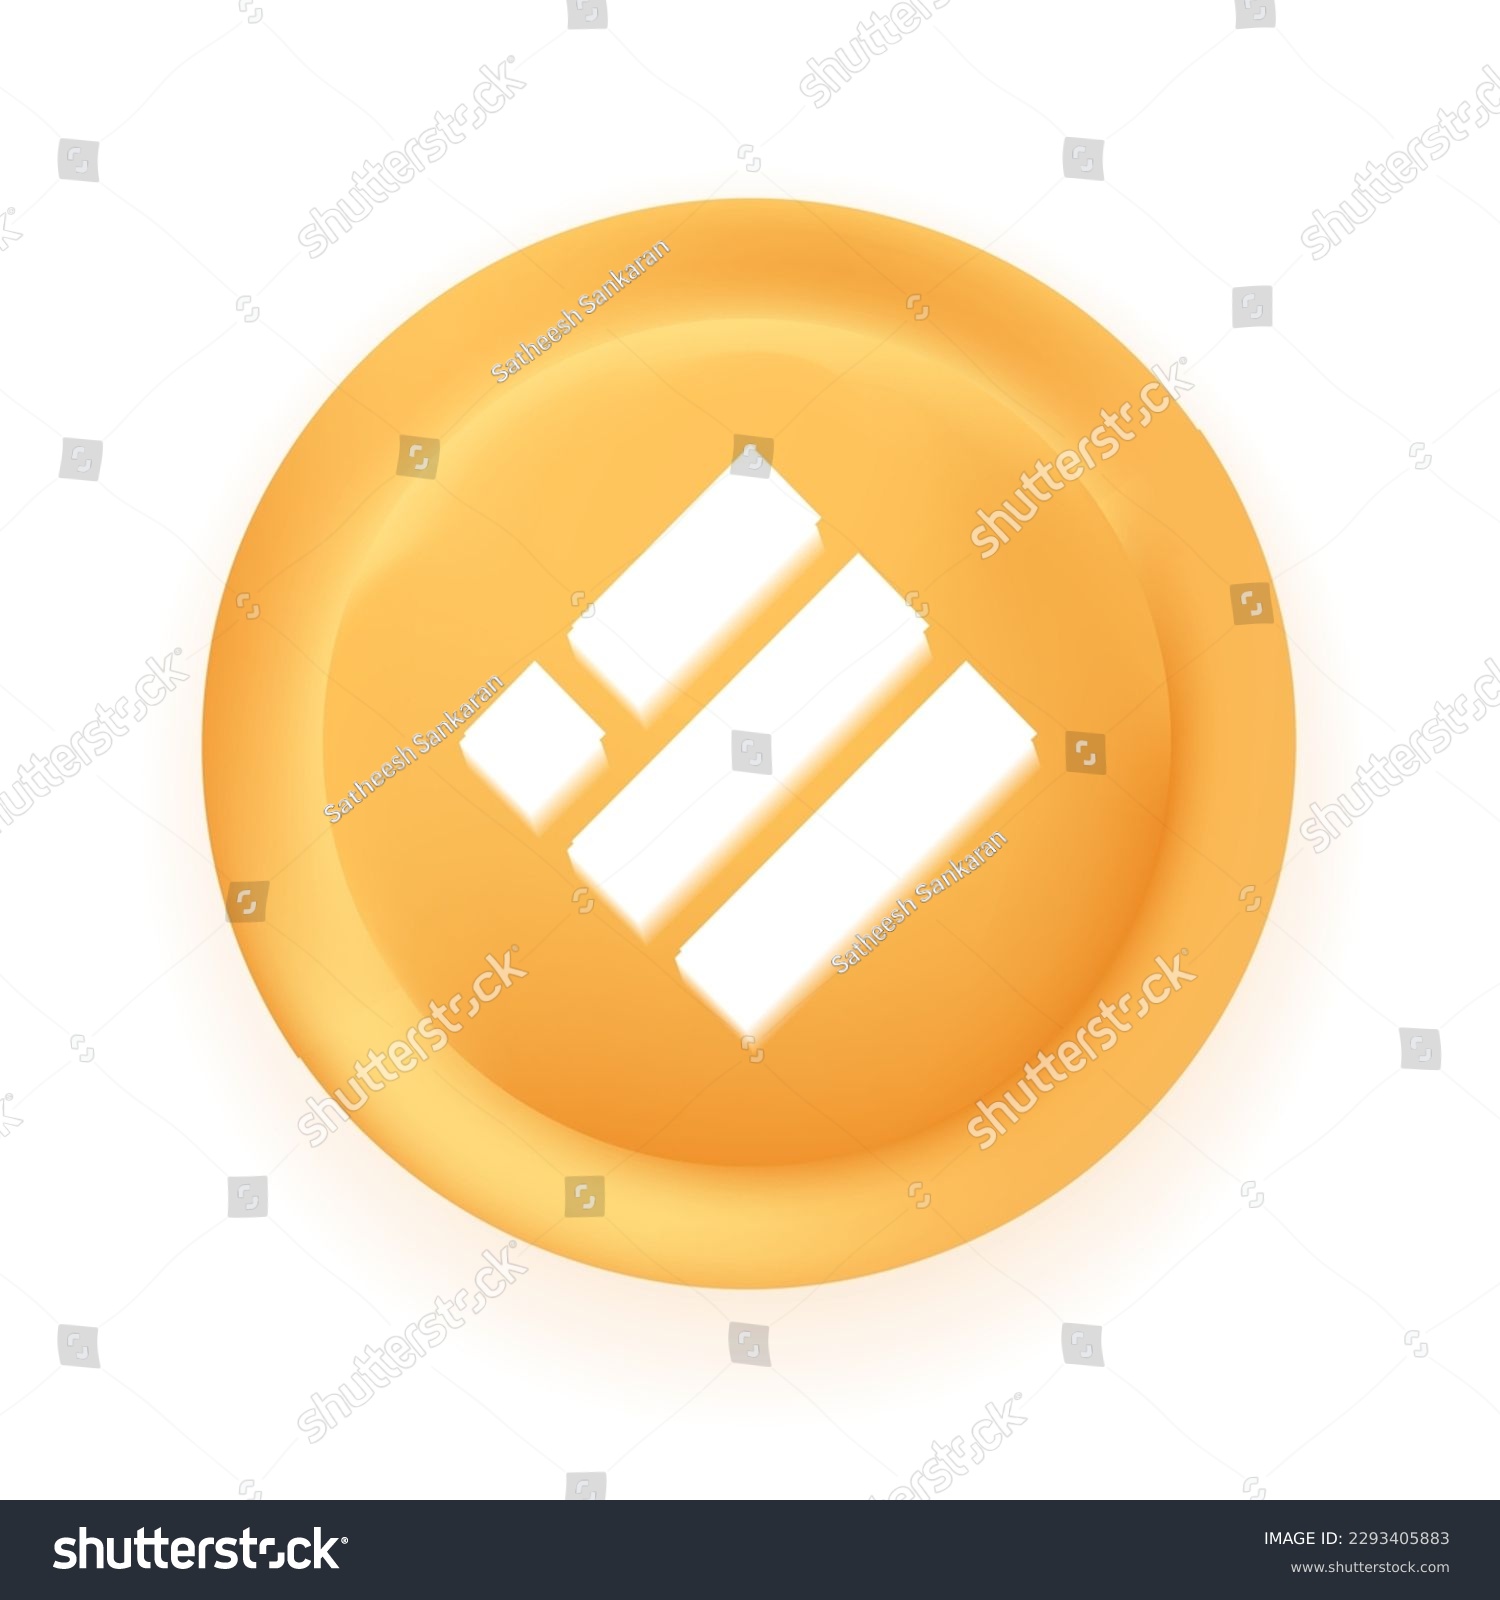 SVG of Binance USD (BUSD) crypto currency 3D coin vector illustration isolated on white background. Can be used as virtual money icon, logo, emblem, sticker and badge designs. svg